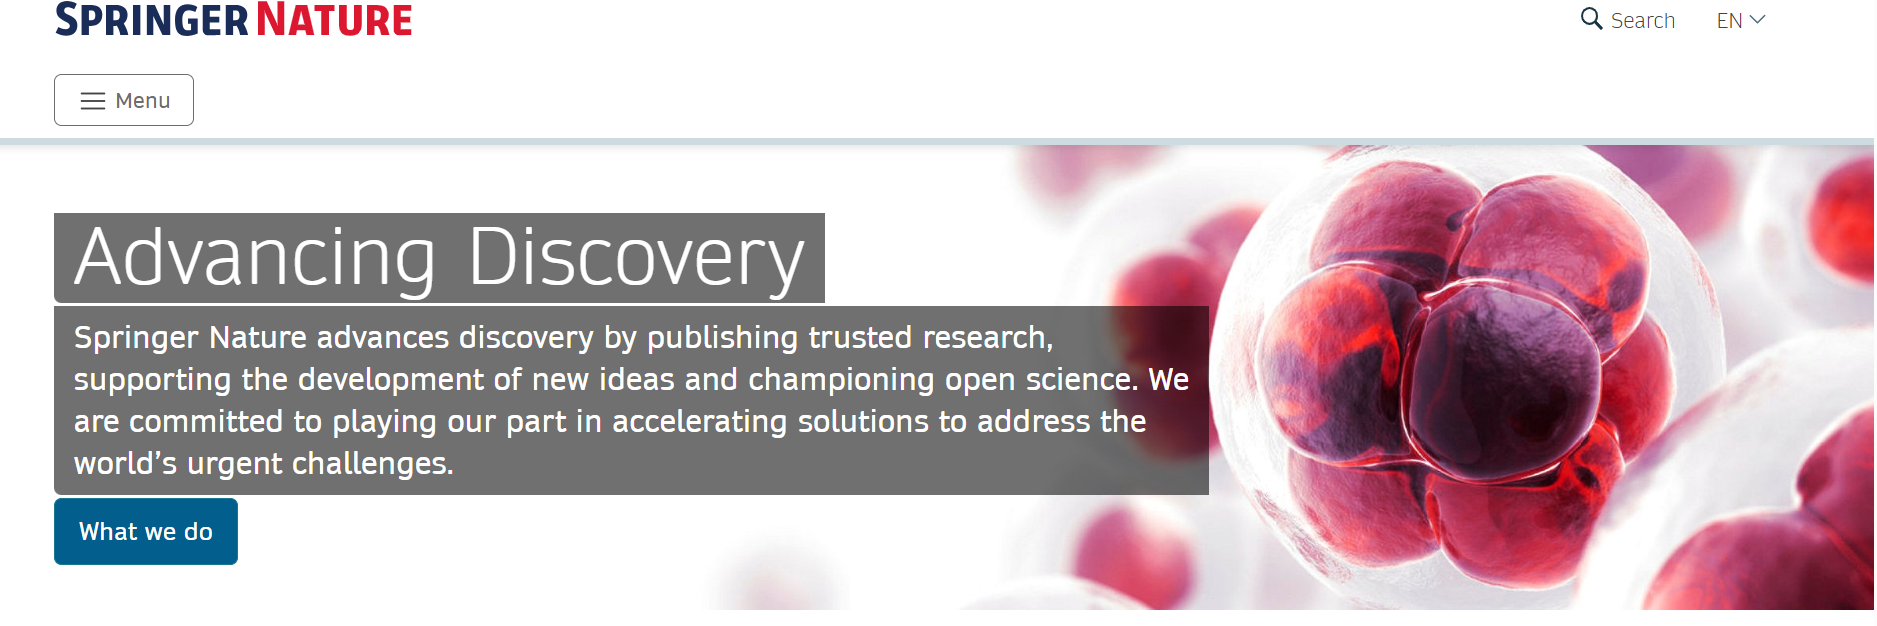 Academic Inquiry|投稿状态分享（ACS，Wiley，RSC，Elsevier，MDPI，Springer Nature出版社）